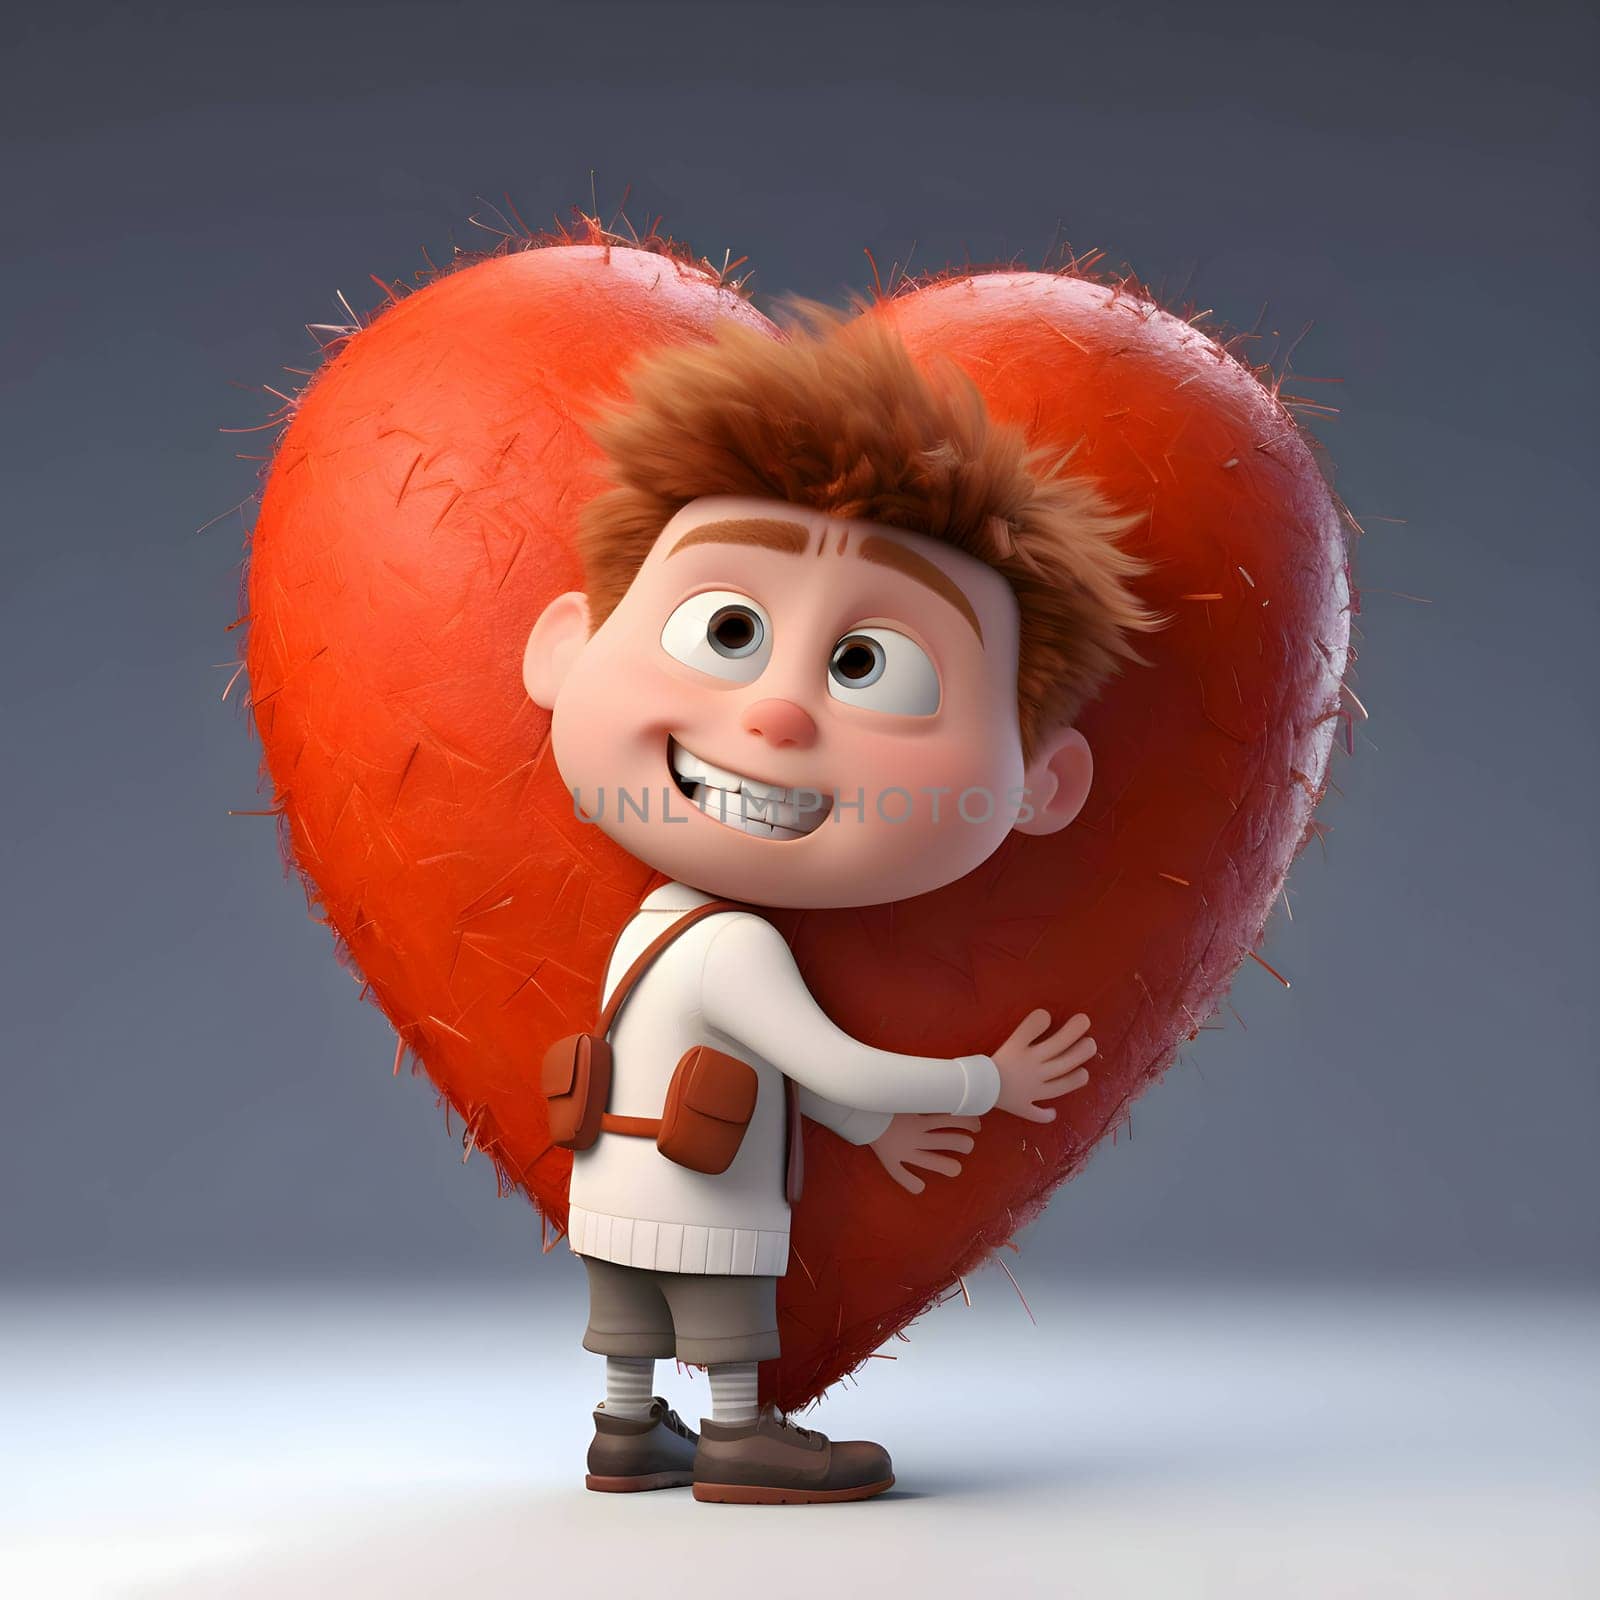 The cartoon boy holds a big red heart in his hands, expressing love and affection.